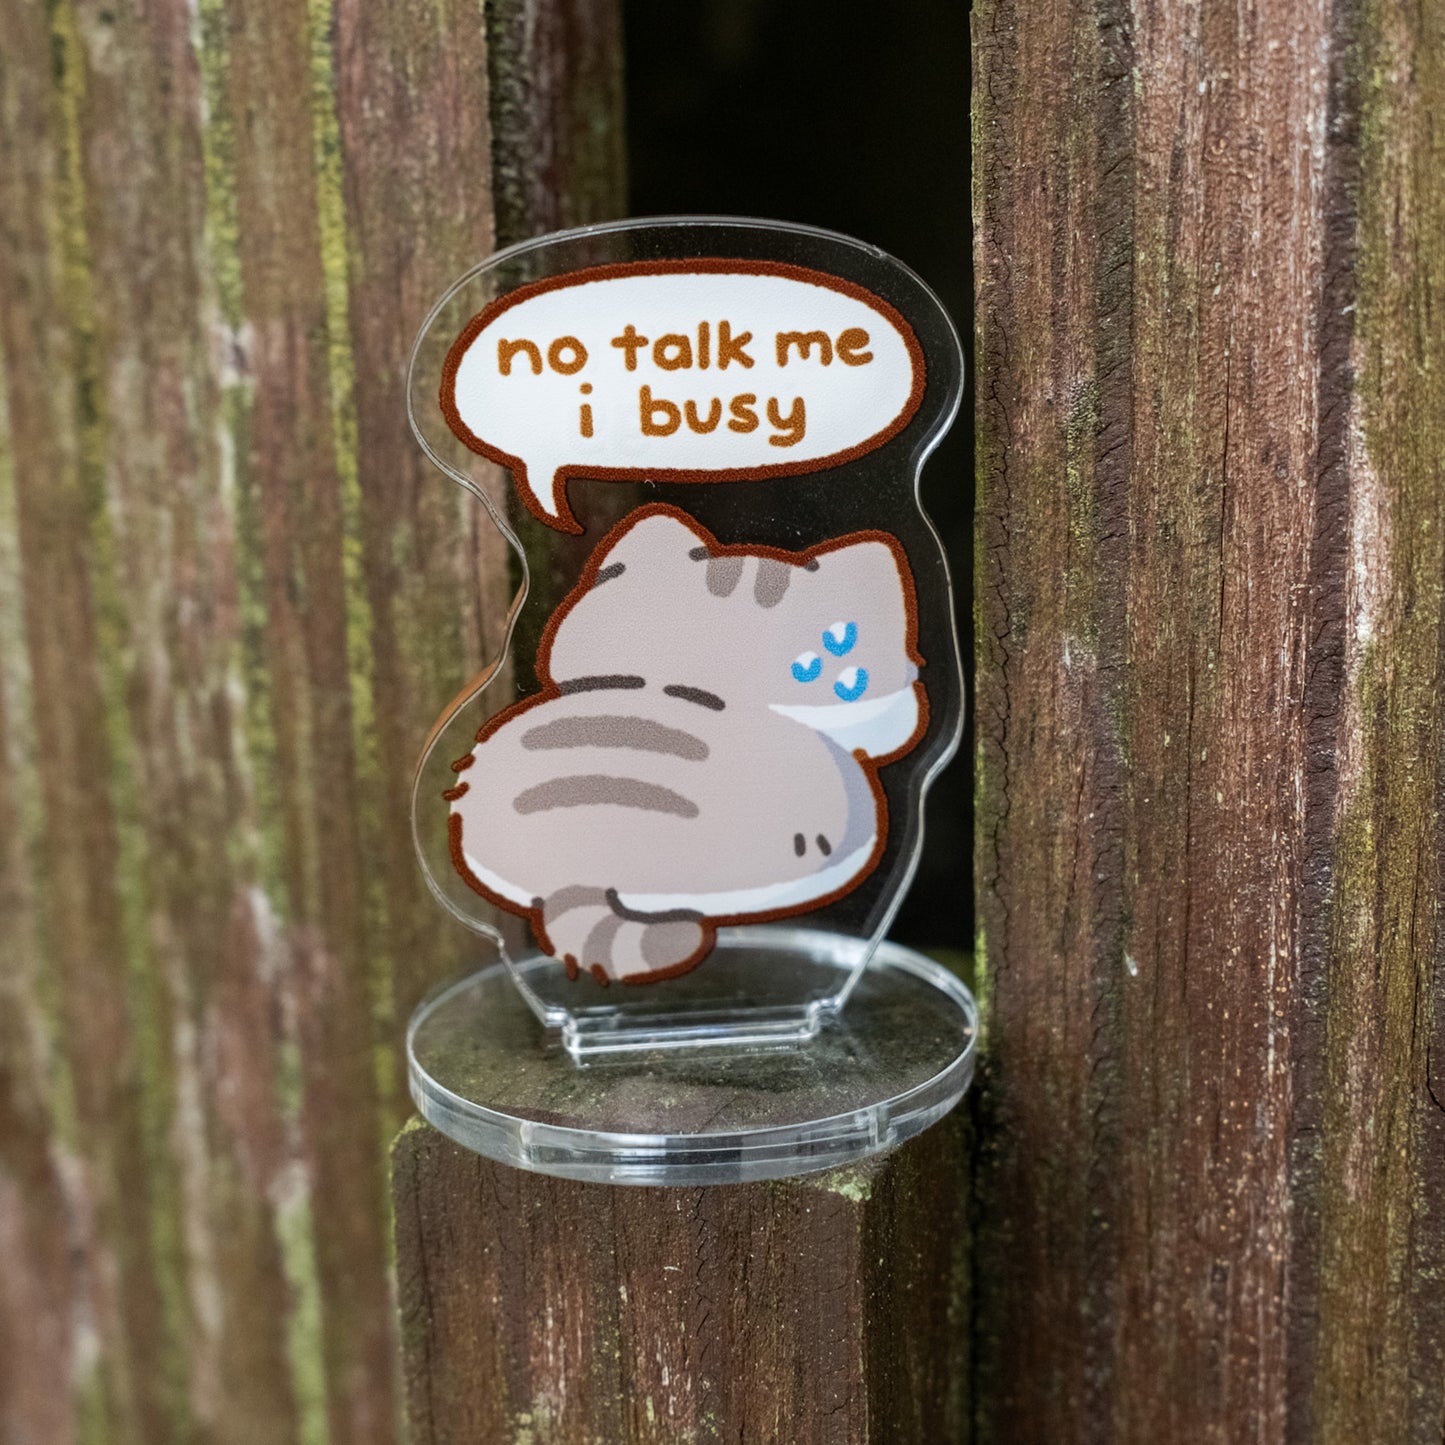 No Talk Me I Angy/Busy Standee